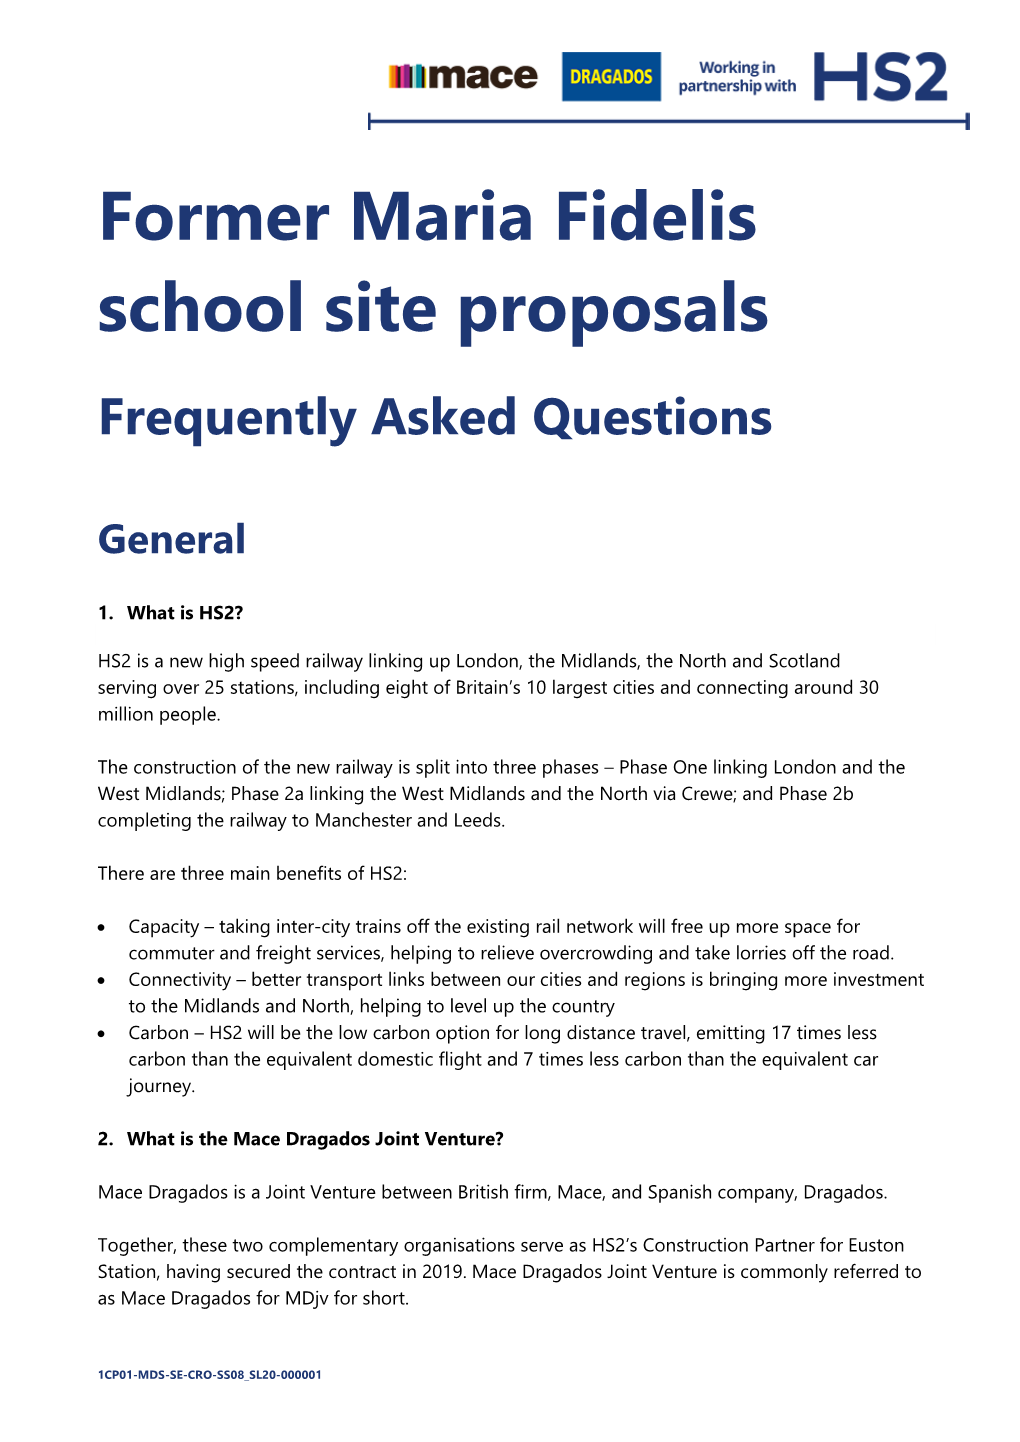 Former Maria Fidelis School Site Proposals Frequently Asked Questions